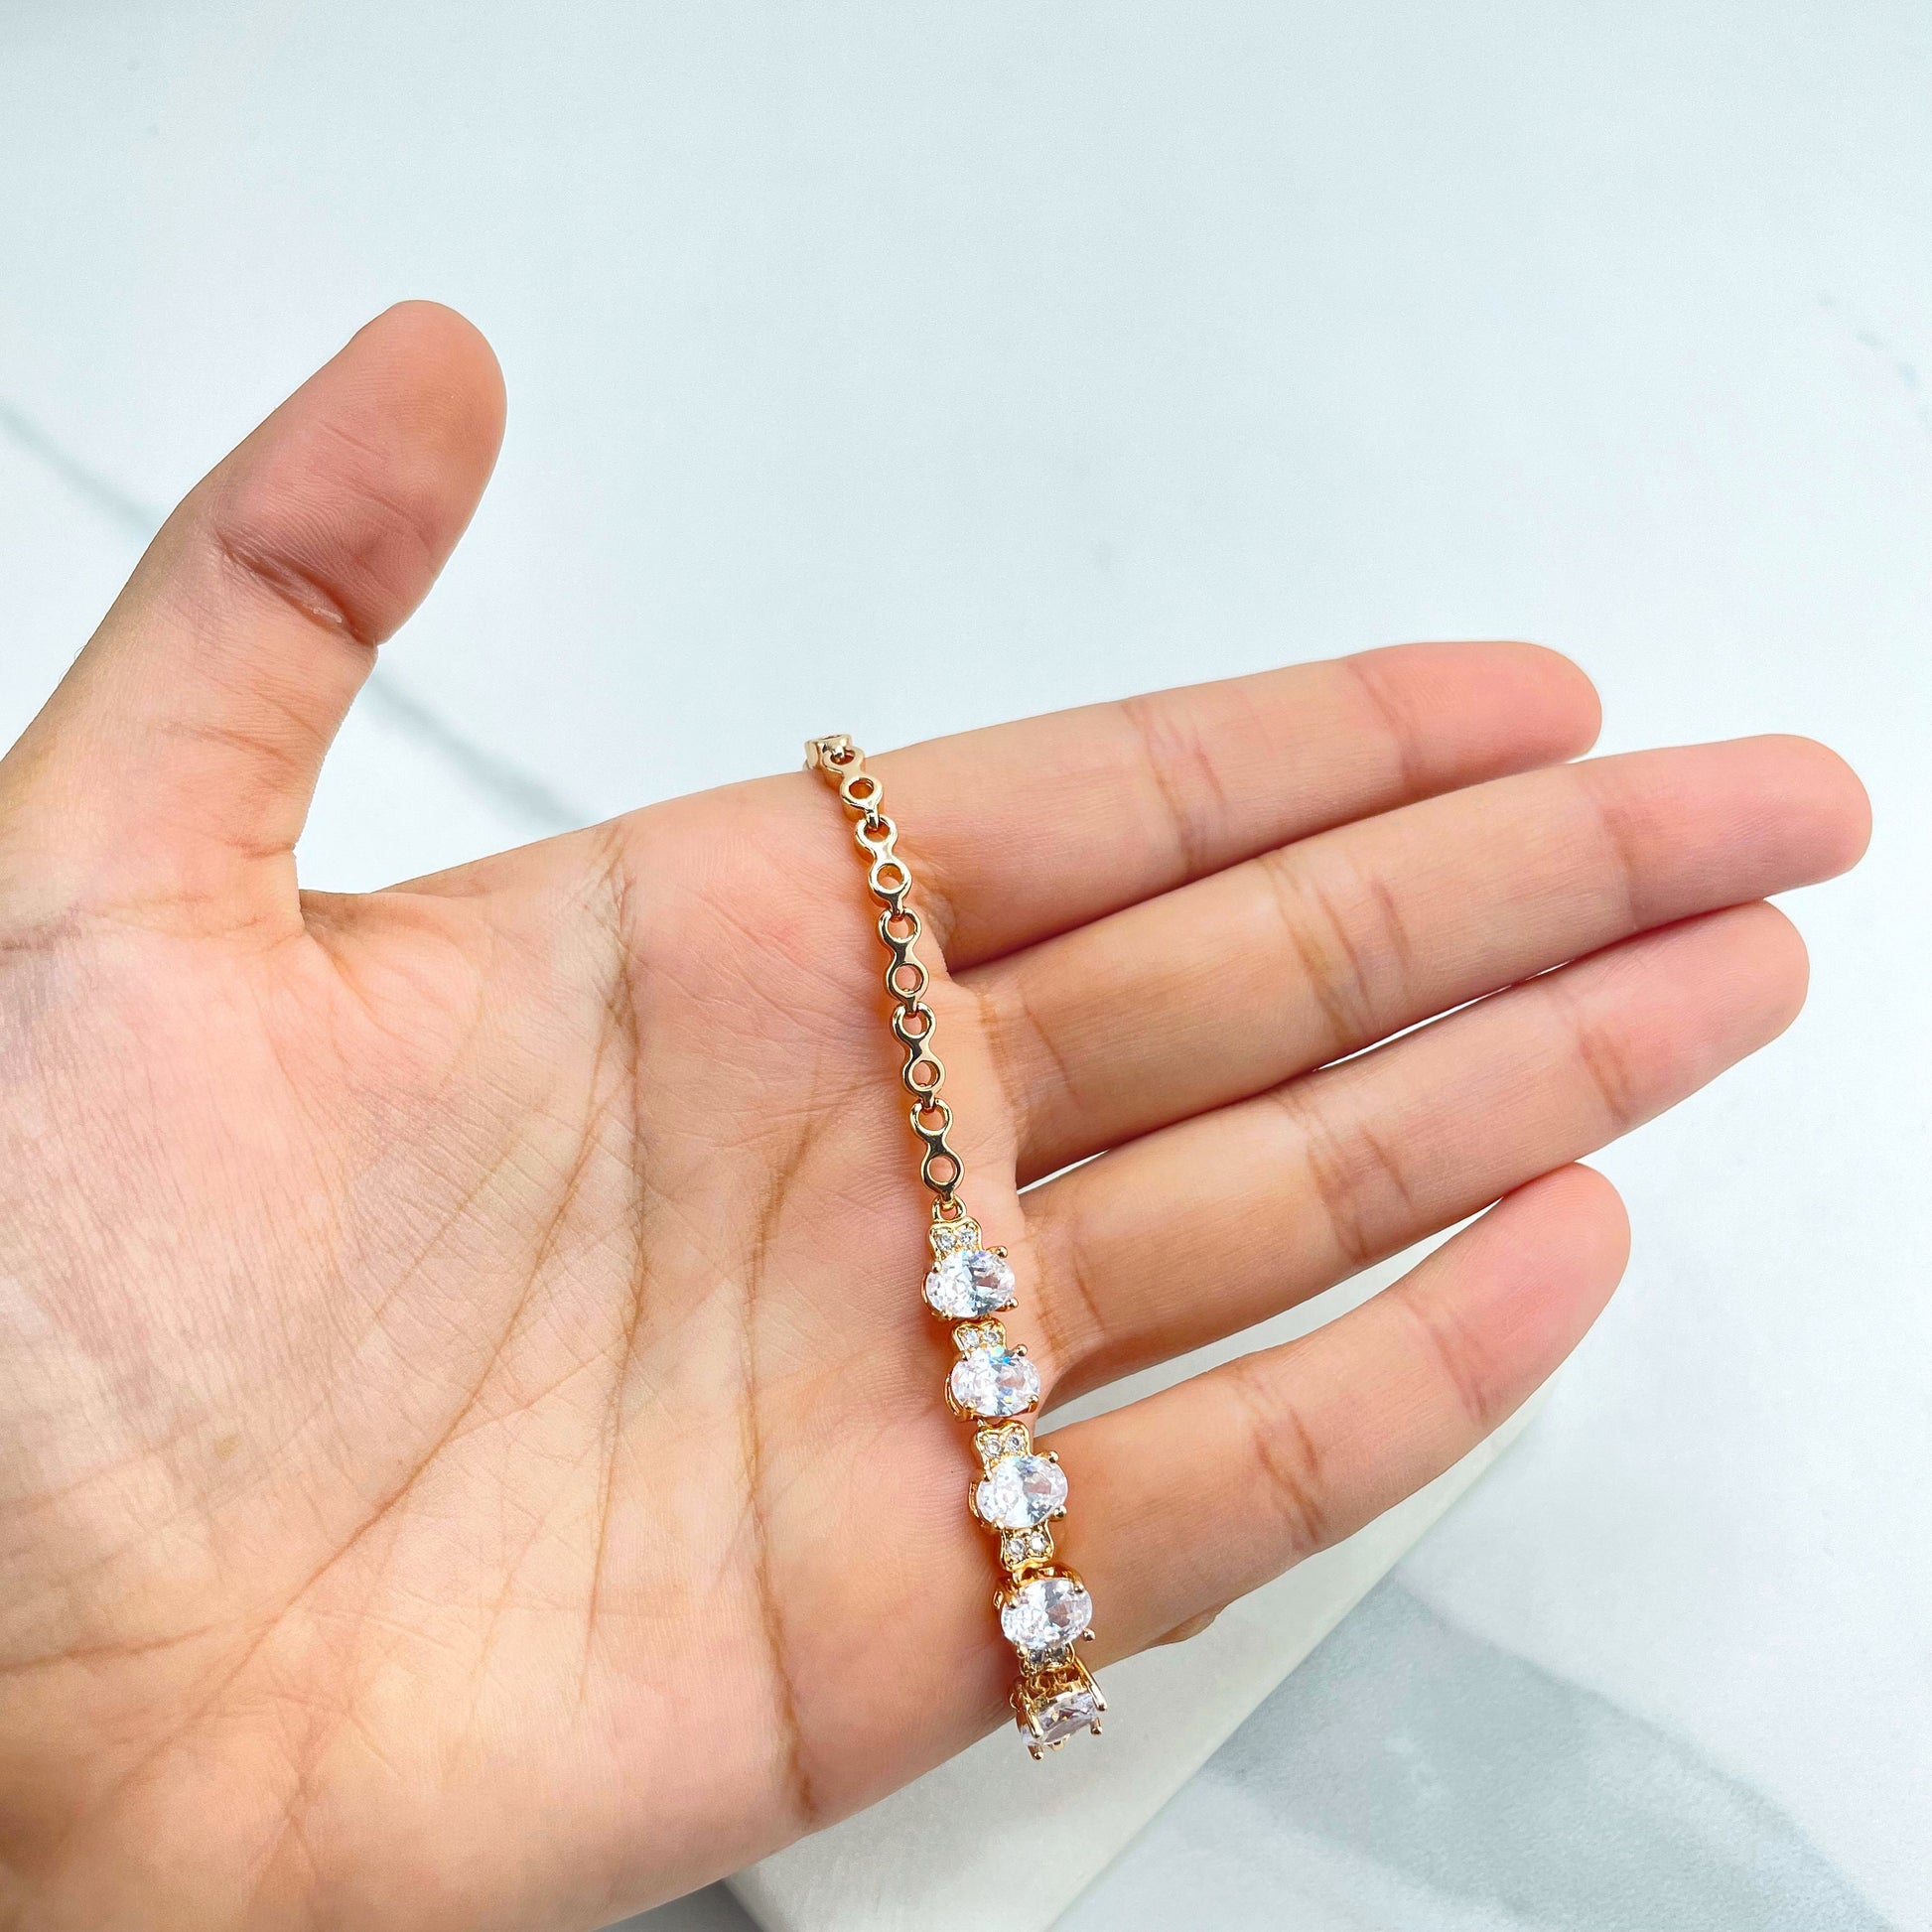 18k Rose Gold Filled Clear Cubic Zirconia Details Linked Bracelet, Wholesale Jewelry Making Supplies